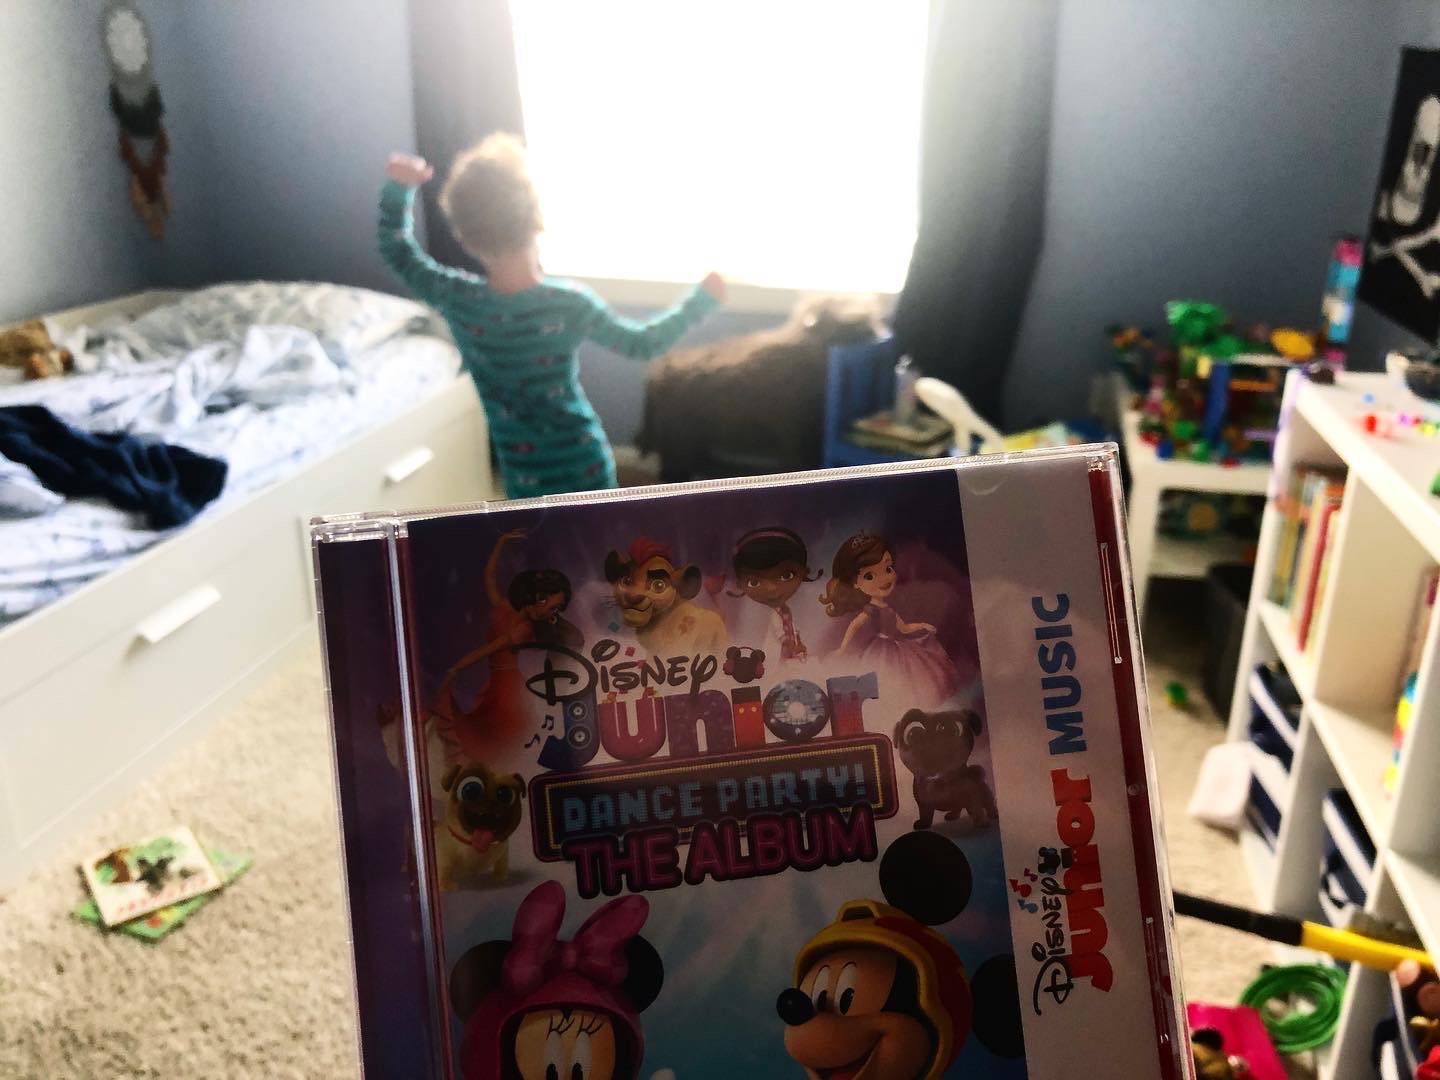 A child is dancing in a messy room with a large open, sunny window. In the foreground of the photo, there is a cd case for Disney Junior songs. Photo by Alyssa Buckley.